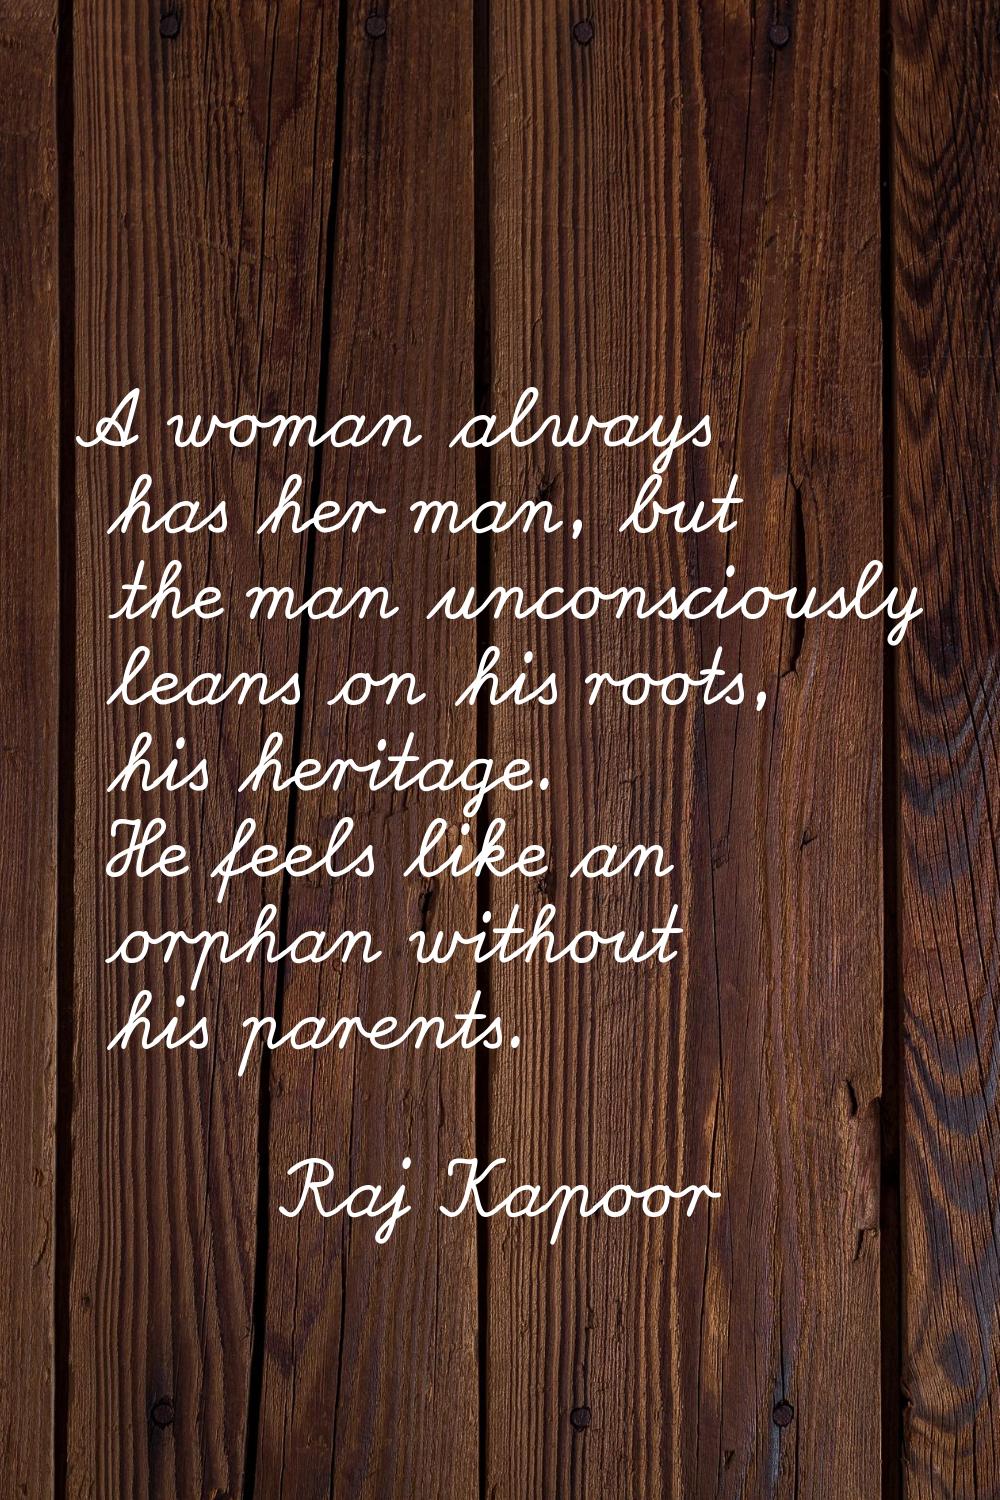 A woman always has her man, but the man unconsciously leans on his roots, his heritage. He feels li